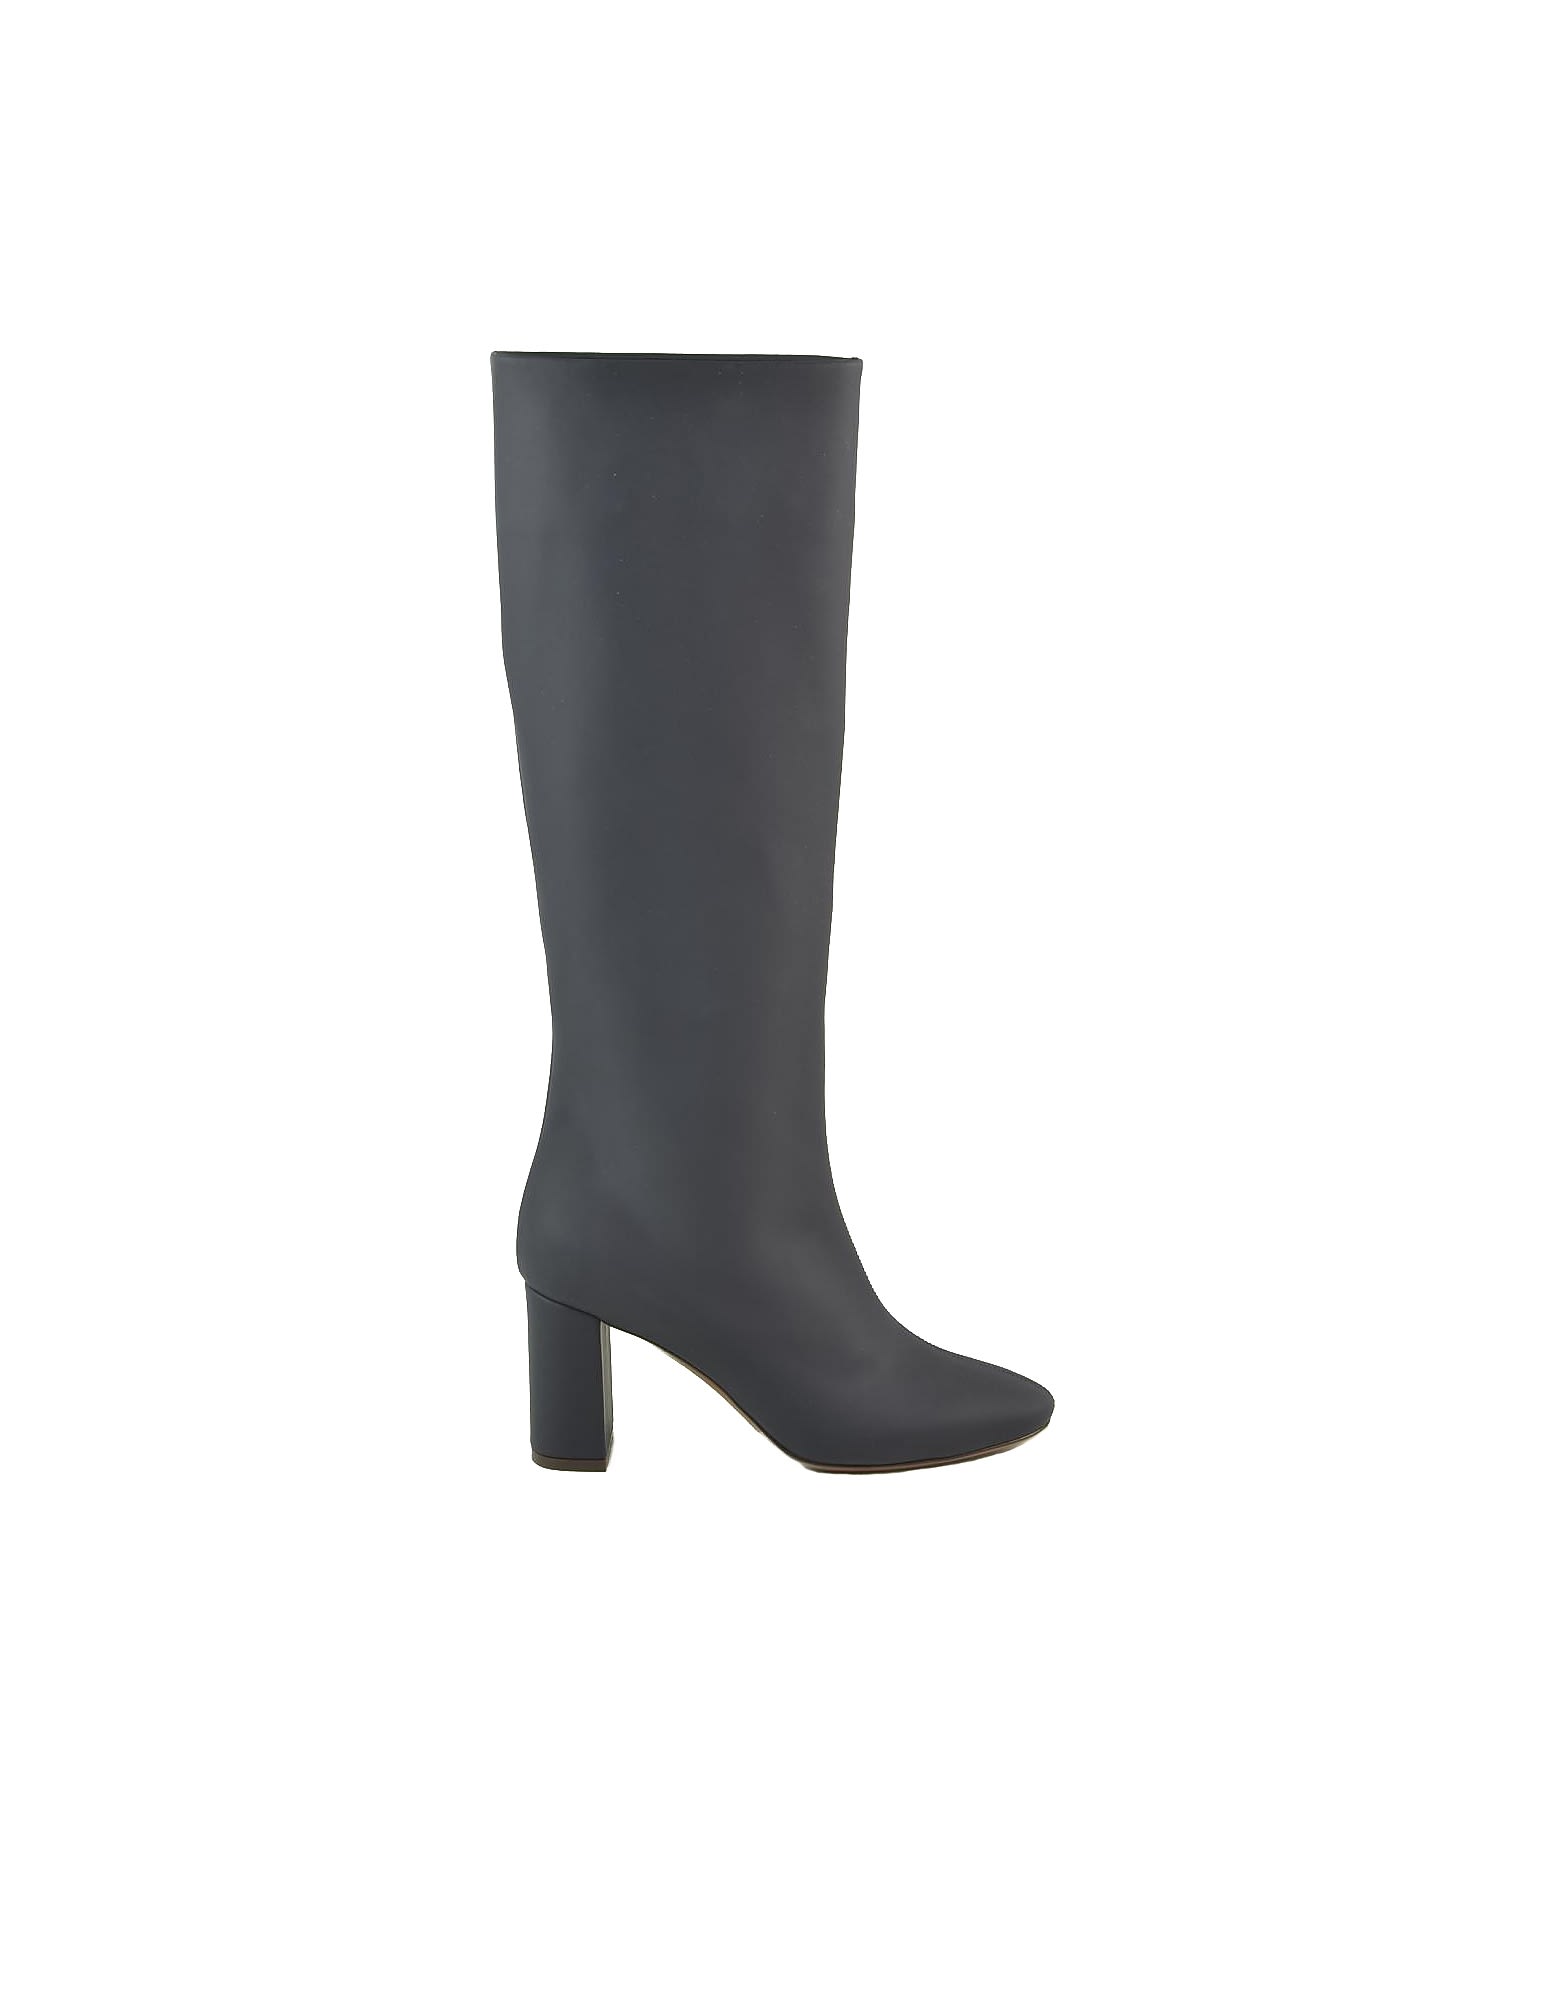 Lautre Chose Navy Blue Smooth Leather Boots